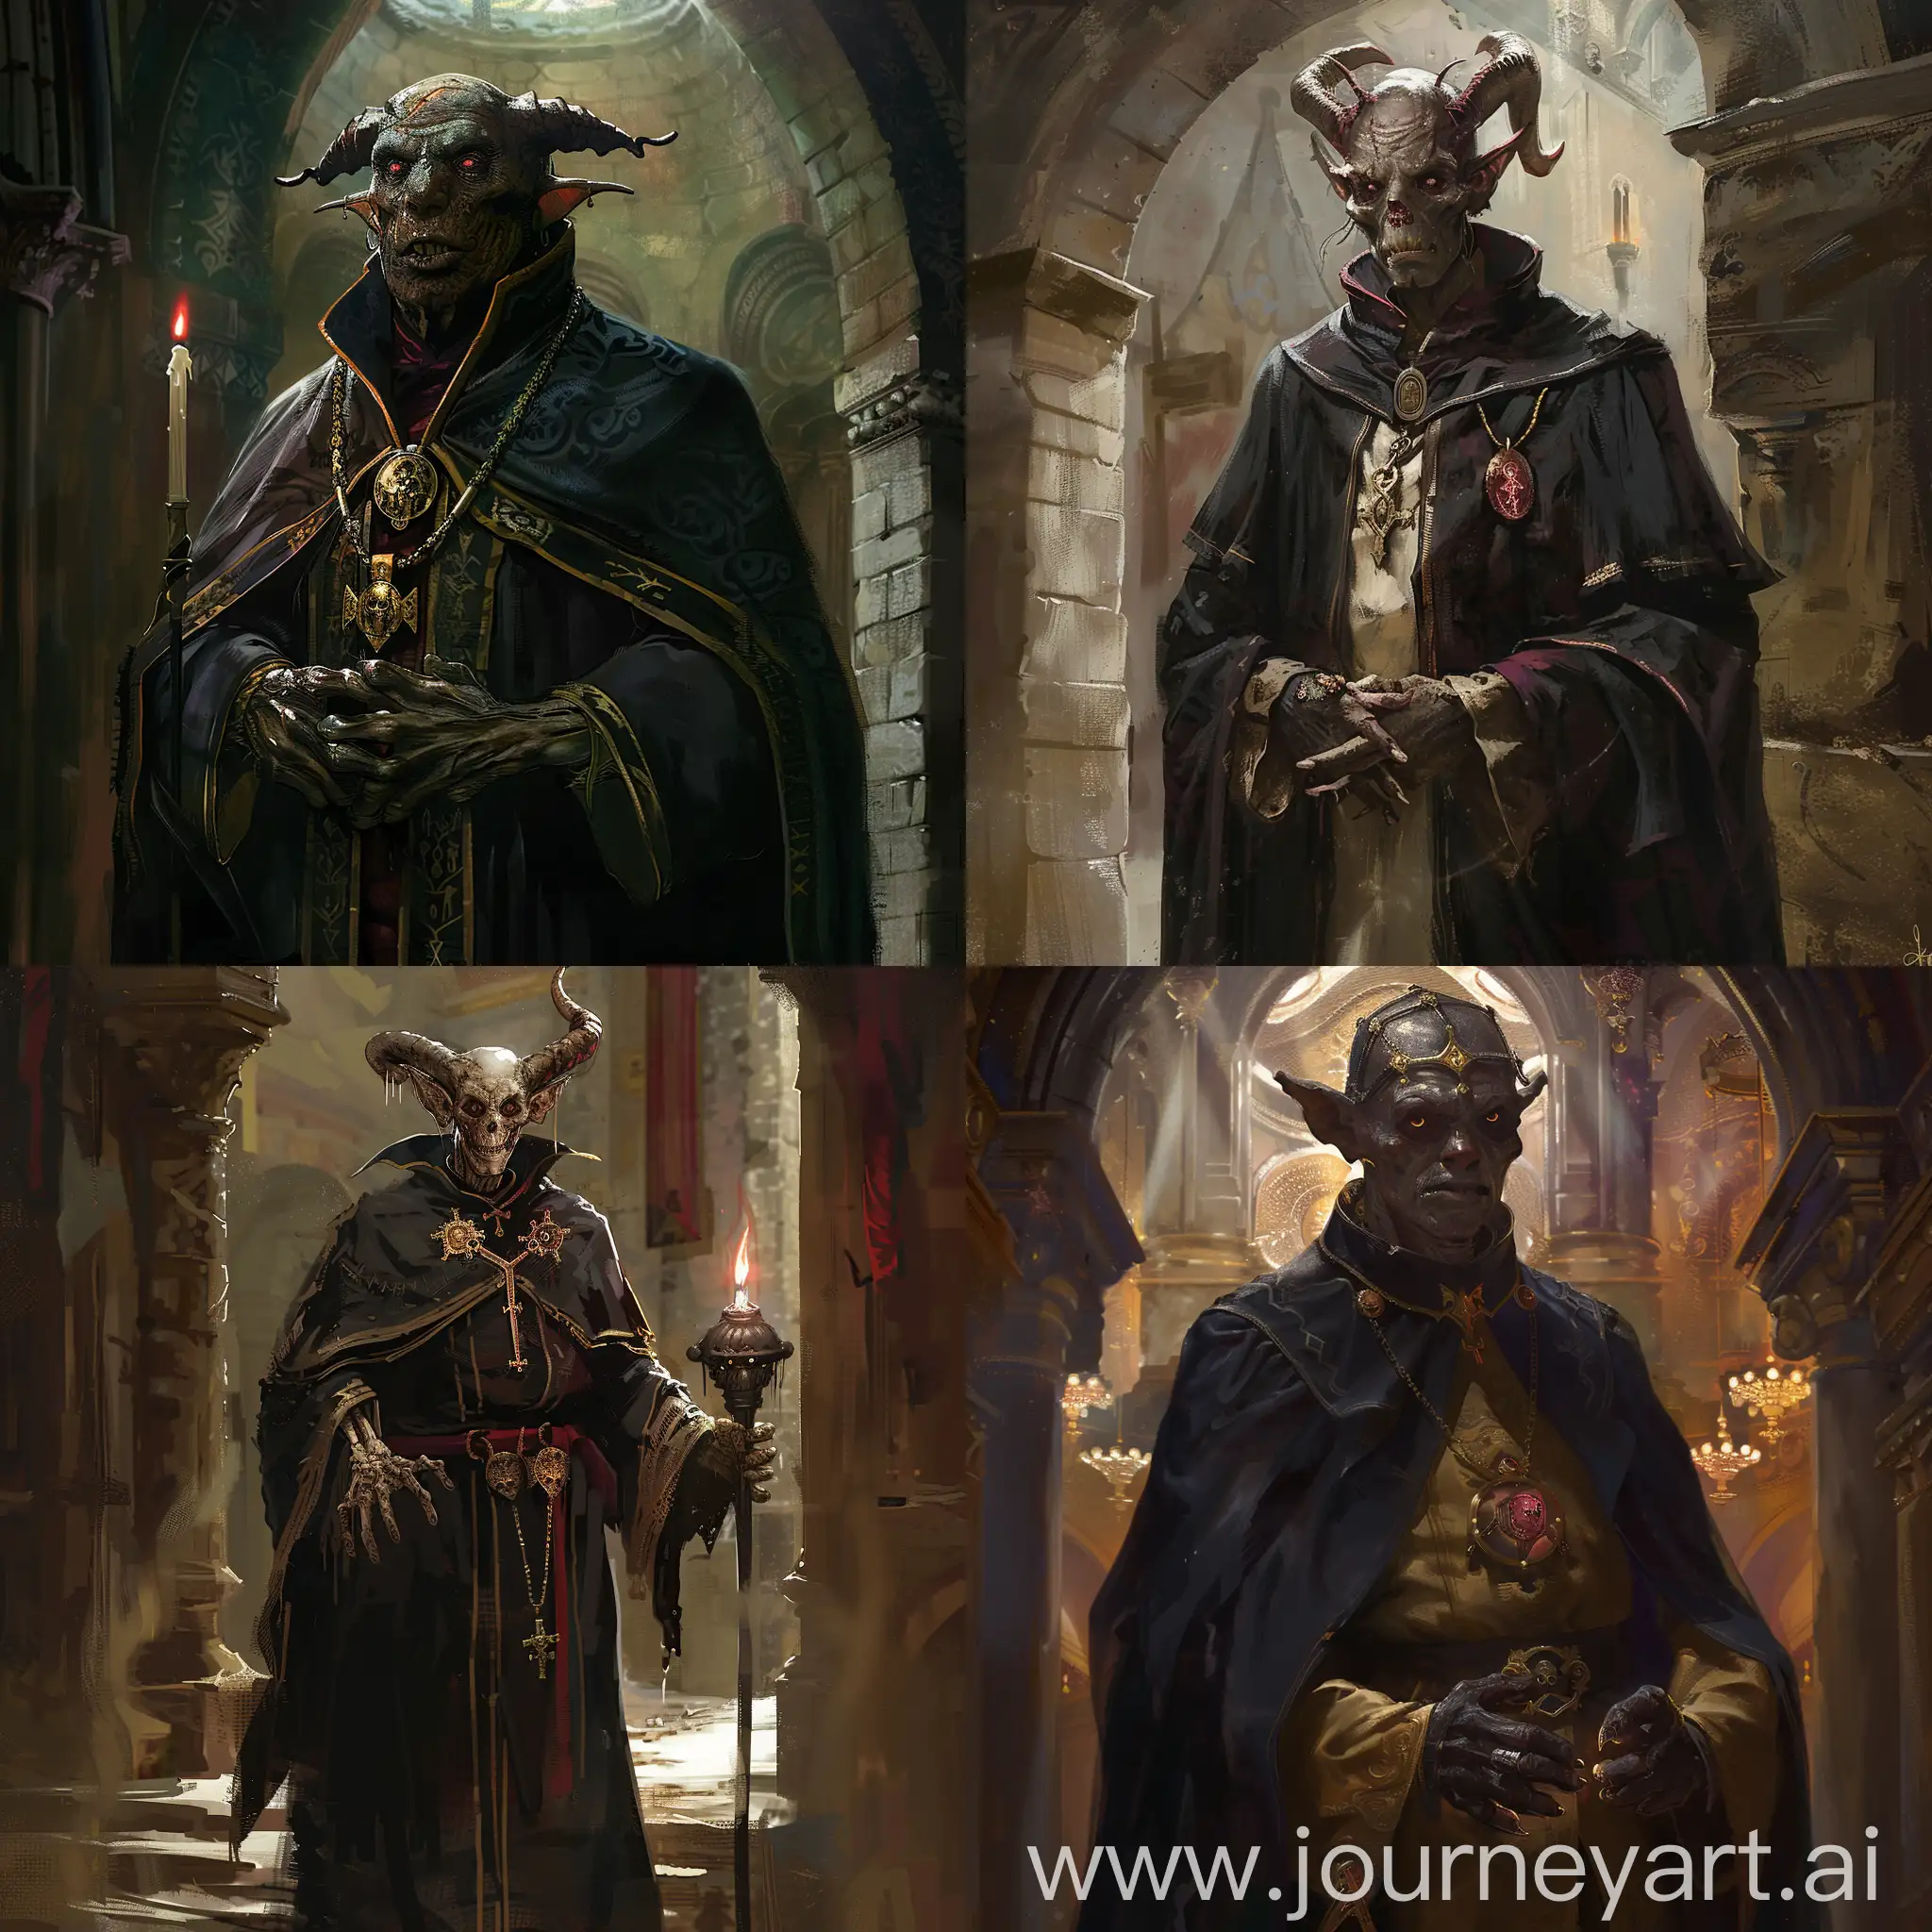 Undead-Sorcerer-Tiefling-Trading-in-Temple